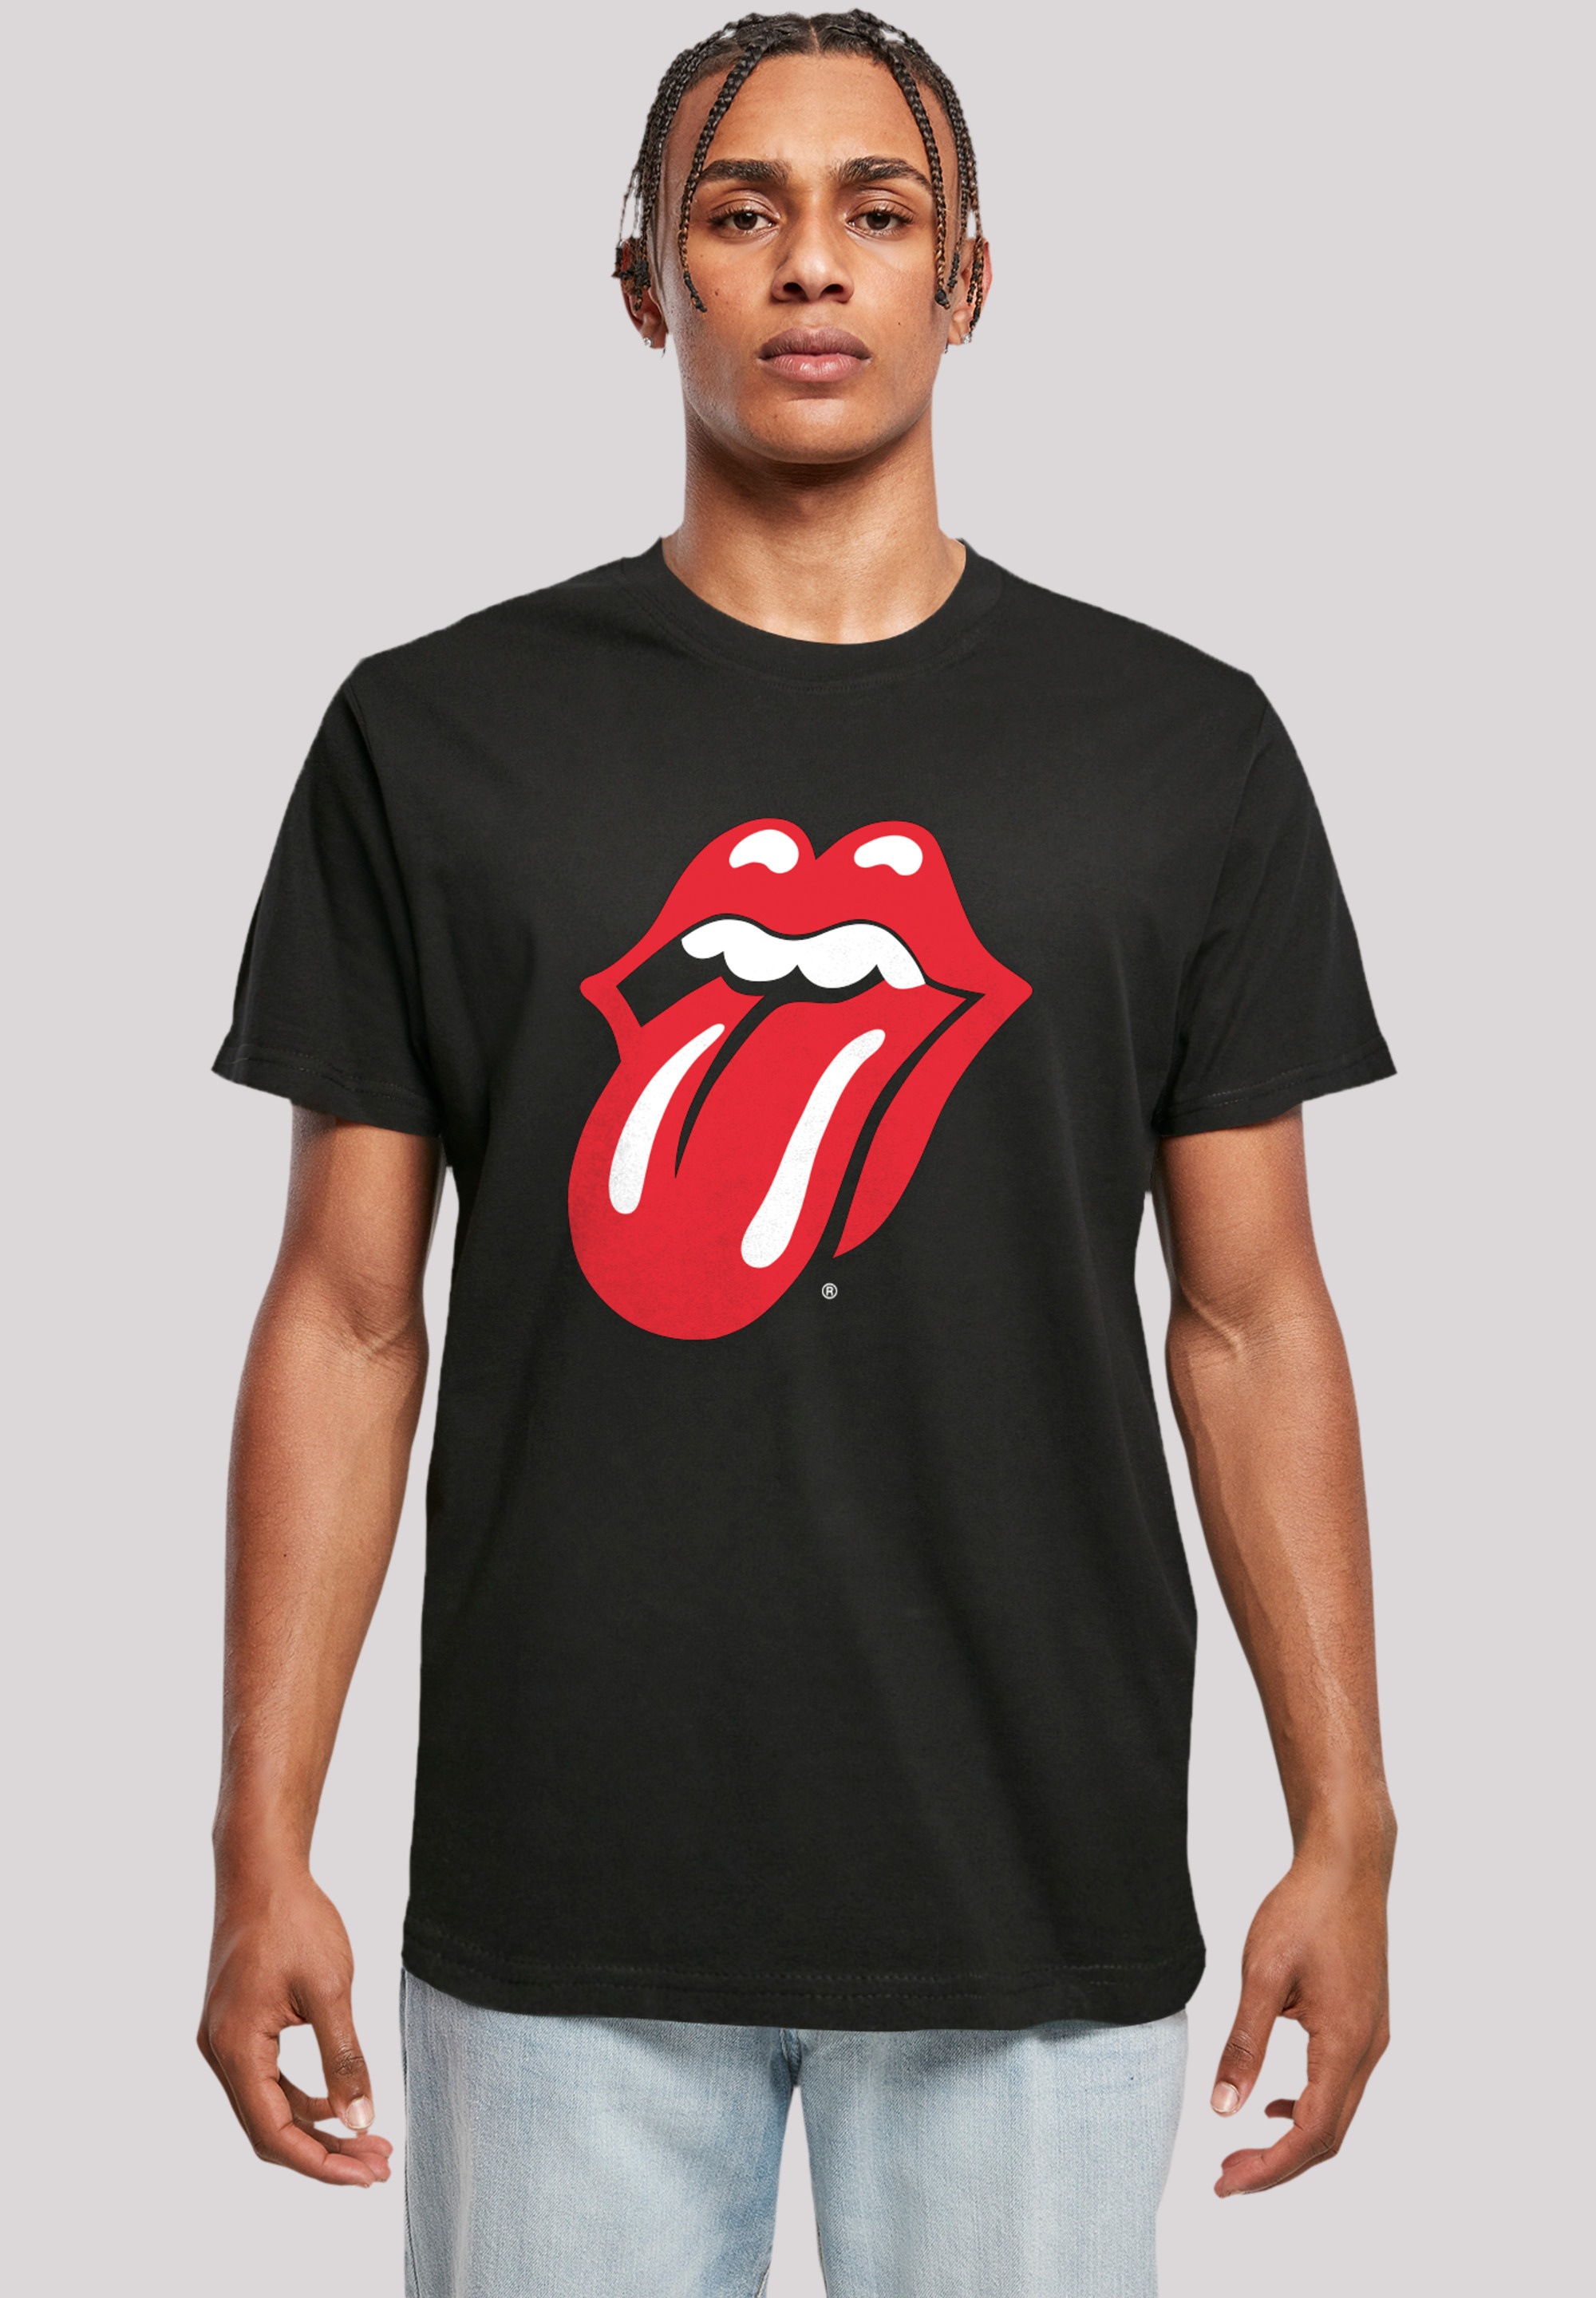 T-Shirt Stones Rote kaufen F4NT4STIC | Rolling Zunge«, BAUR »The ▷ Print